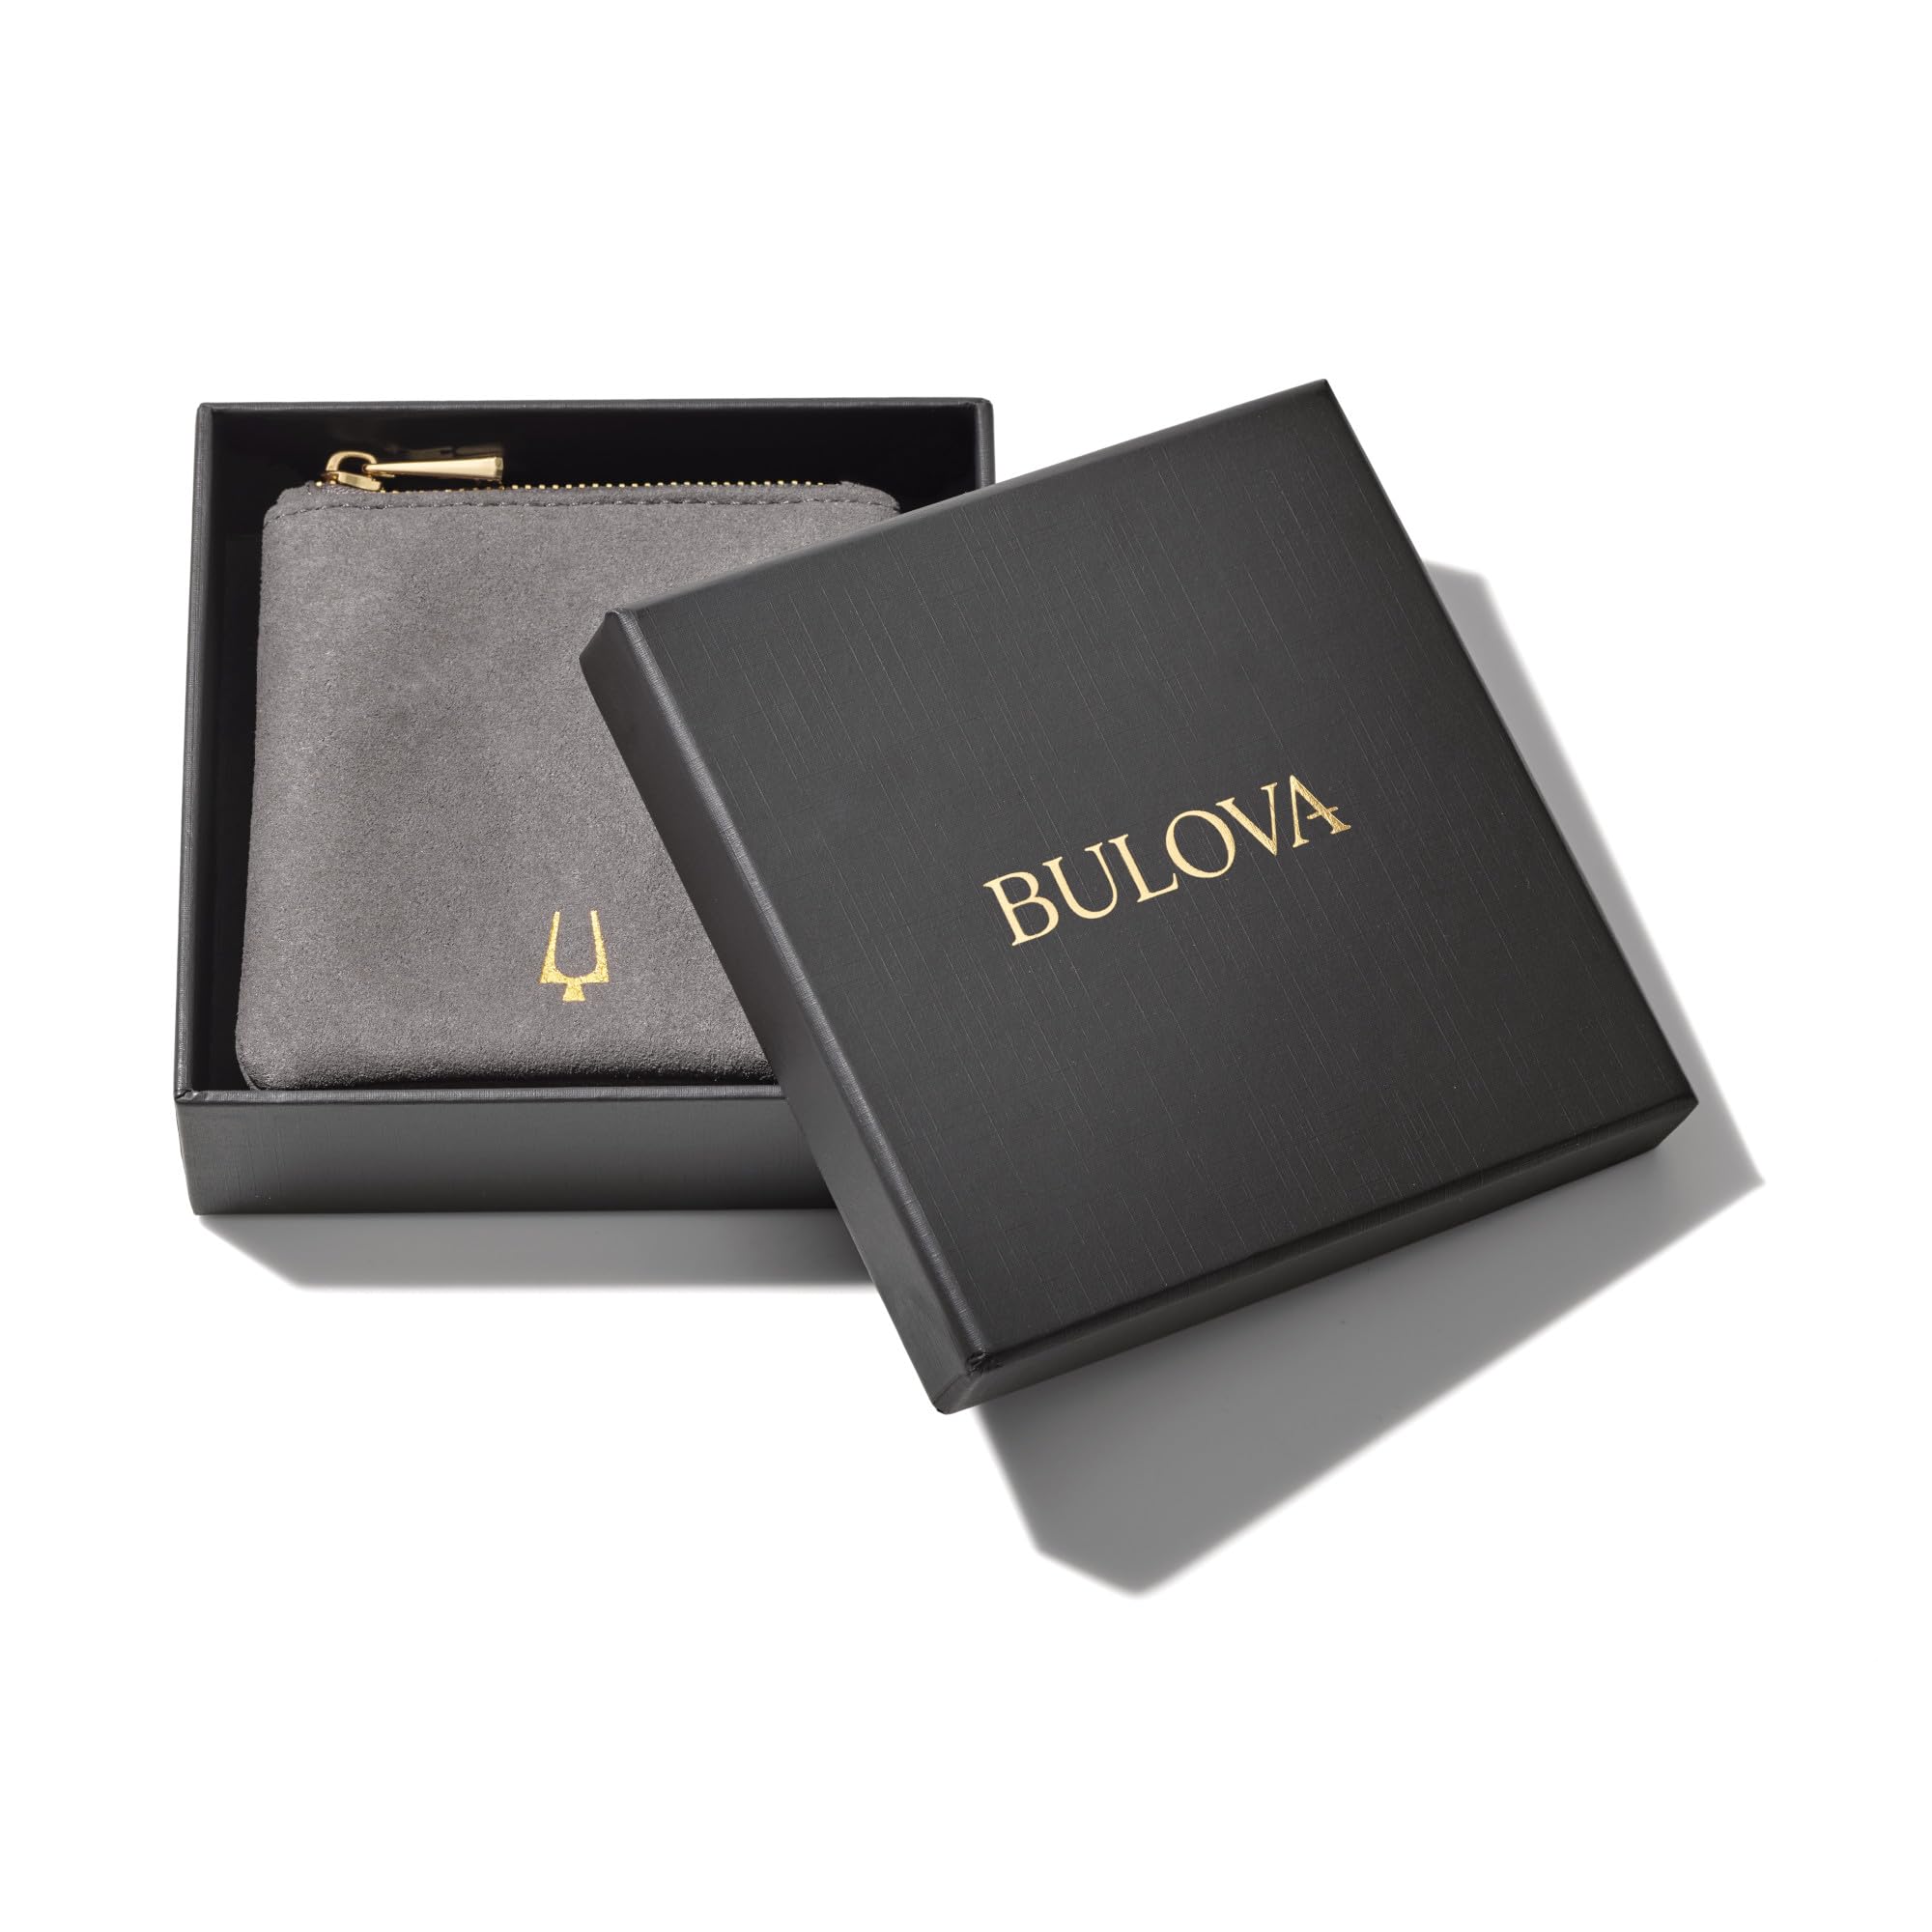 Bulova Jewelry Men's Icon Green Malachite Obelisk Shaped Pendant and Sterling Silver Rounded Box Link Chain Necklace,Length 24-26